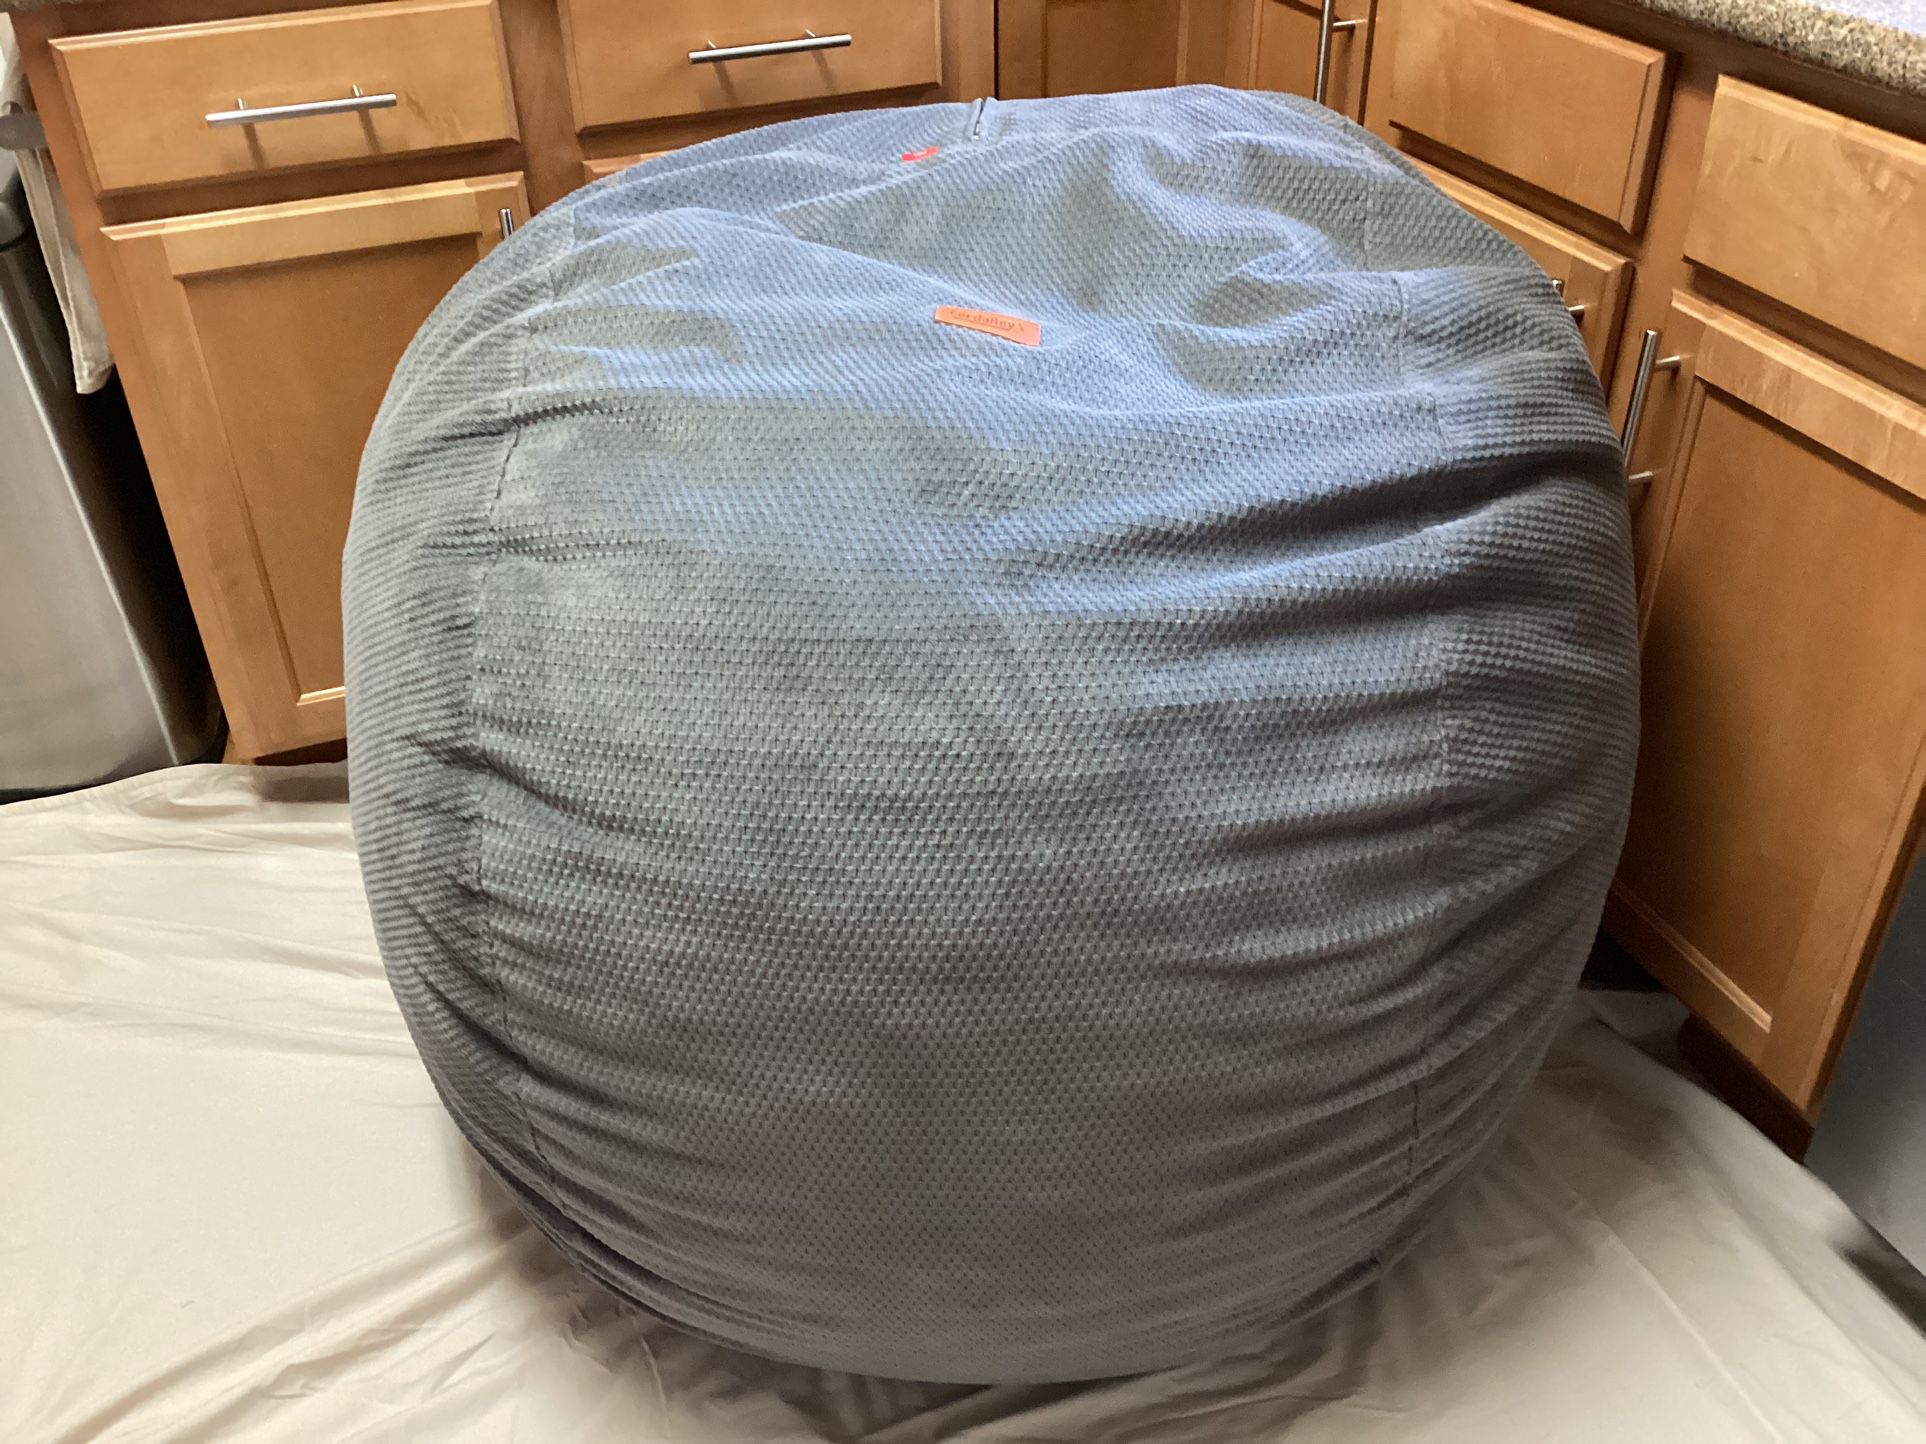   Bean Bag Chair/Bed- CordaRoy’s.      (BR)